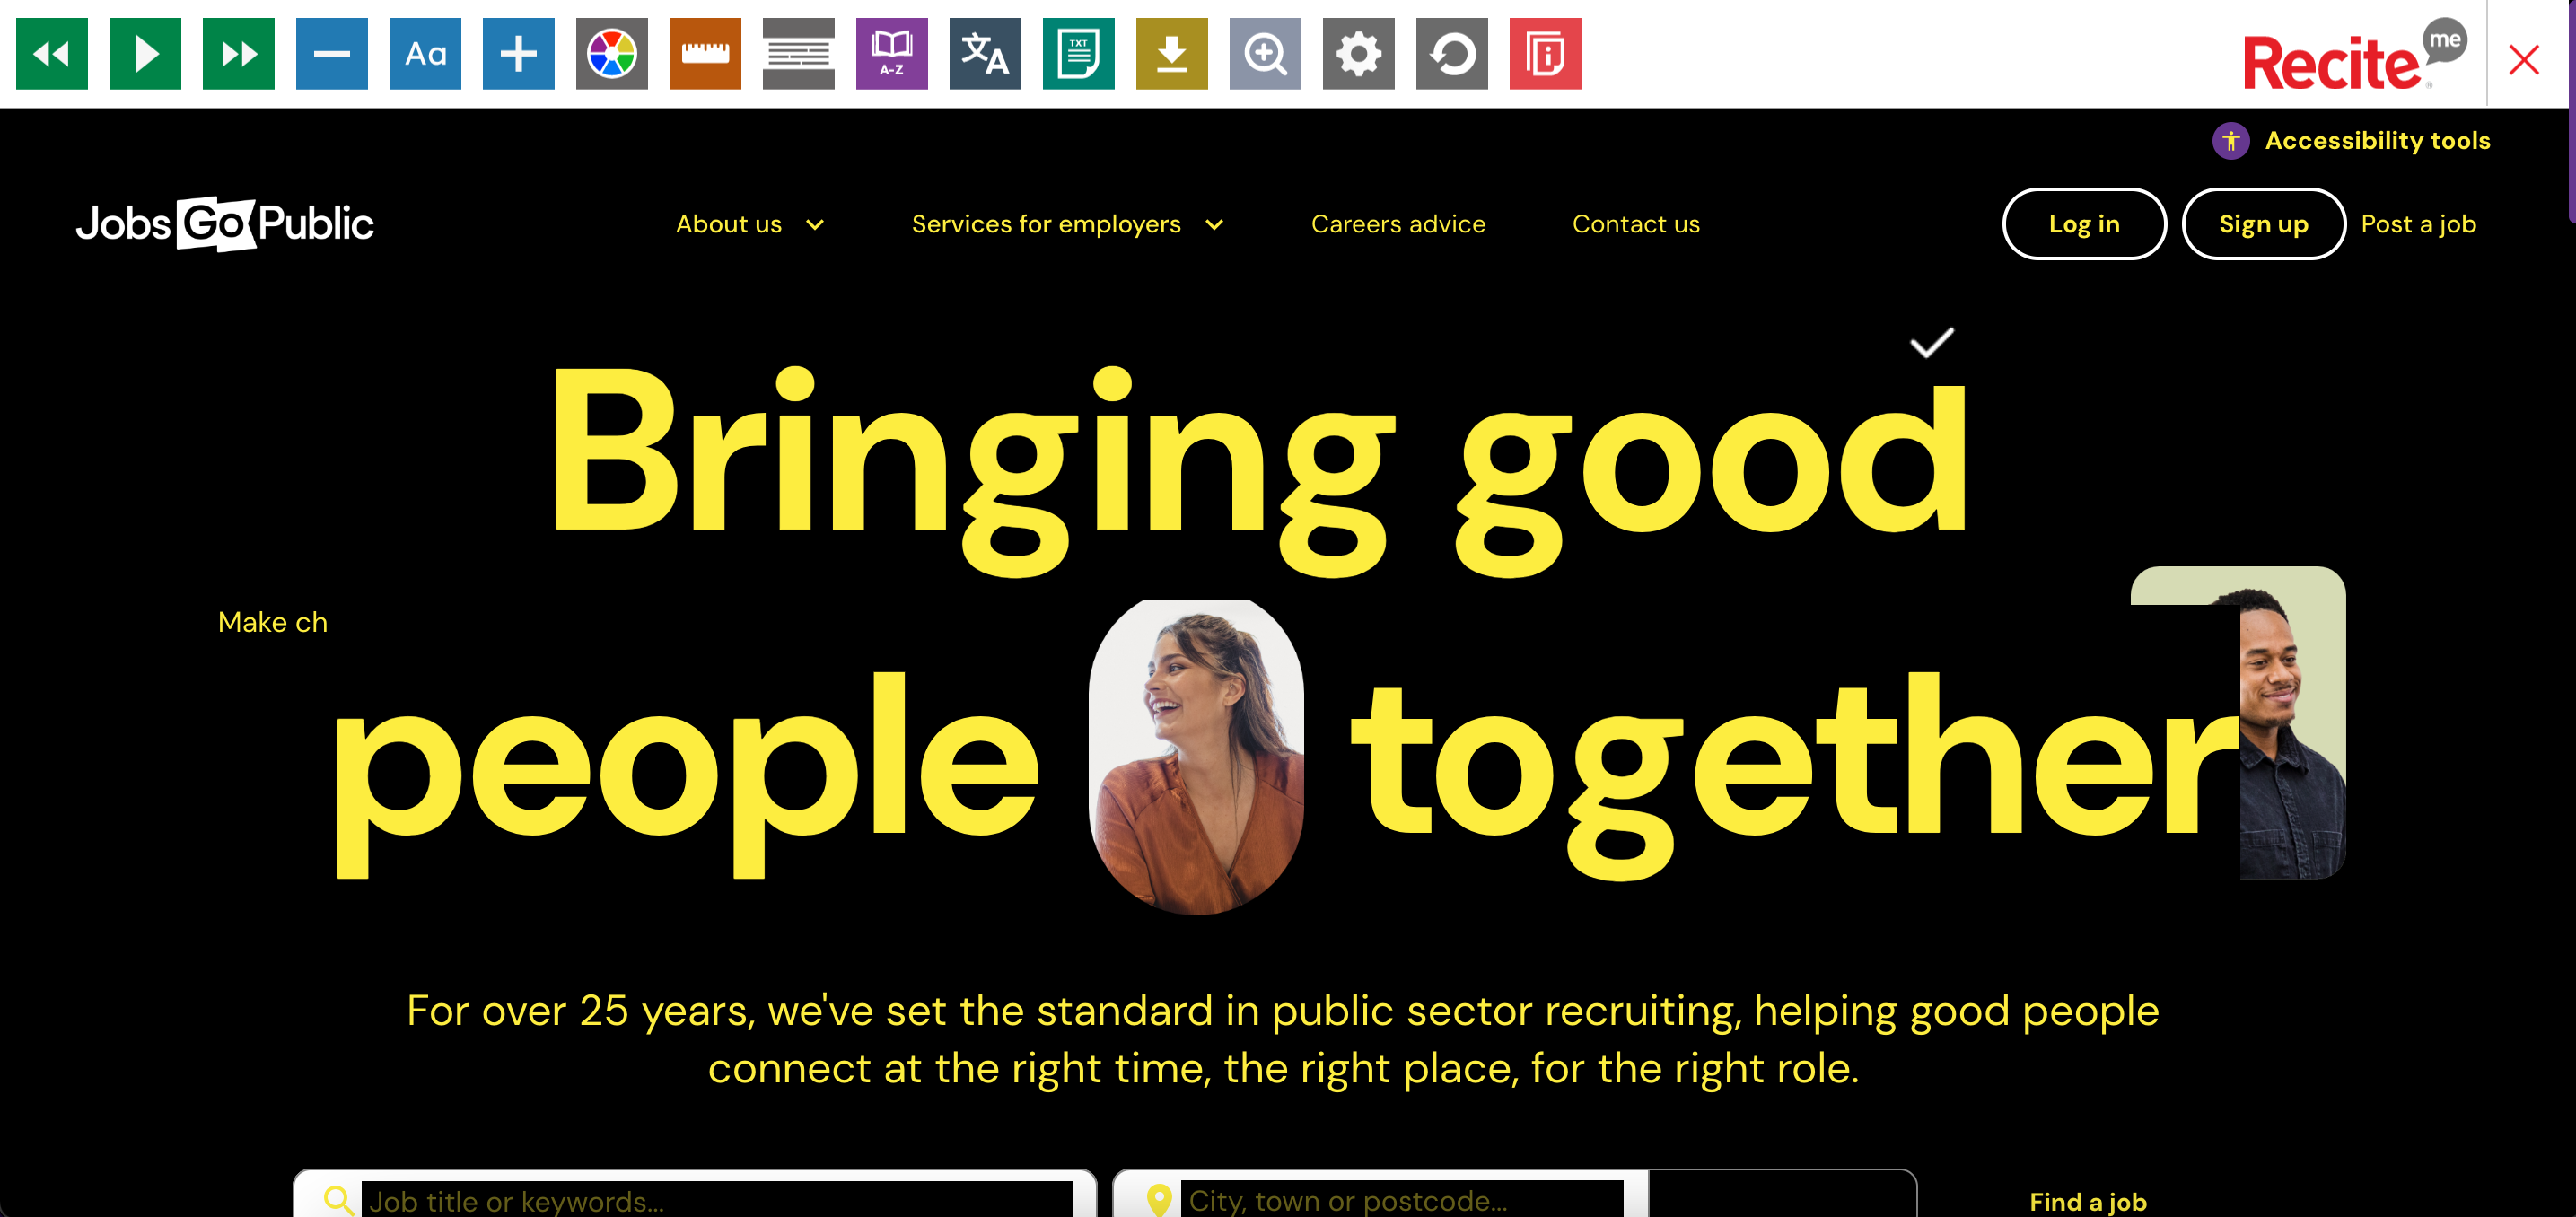 A screen capture of Jobs Go Public homepage with a black background and contrasting yellow text